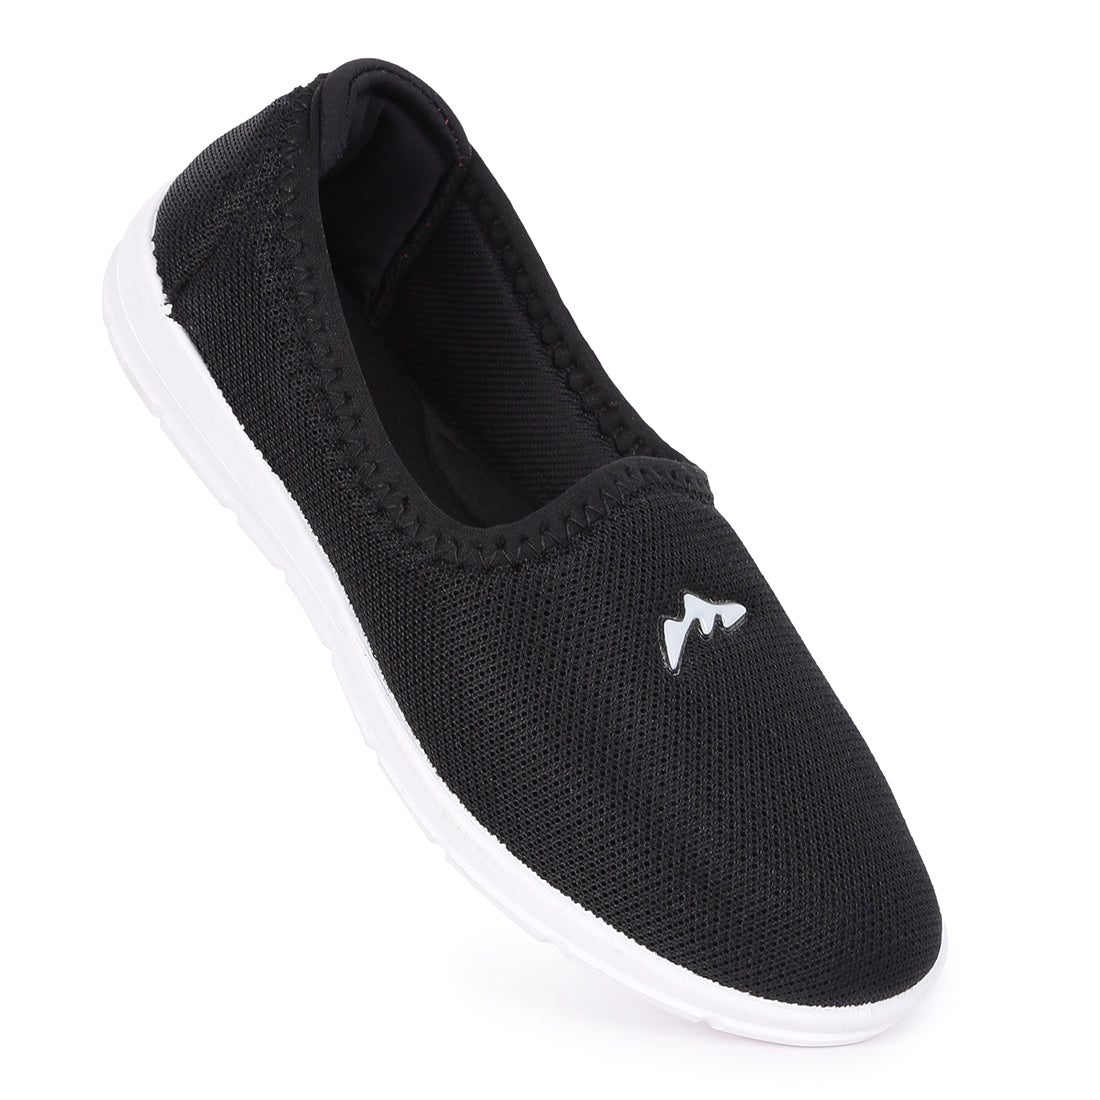 Stimulus PVSTL5100AP Black Stylish Smart Daily Occasional Comfortable Casual Shoes For Women